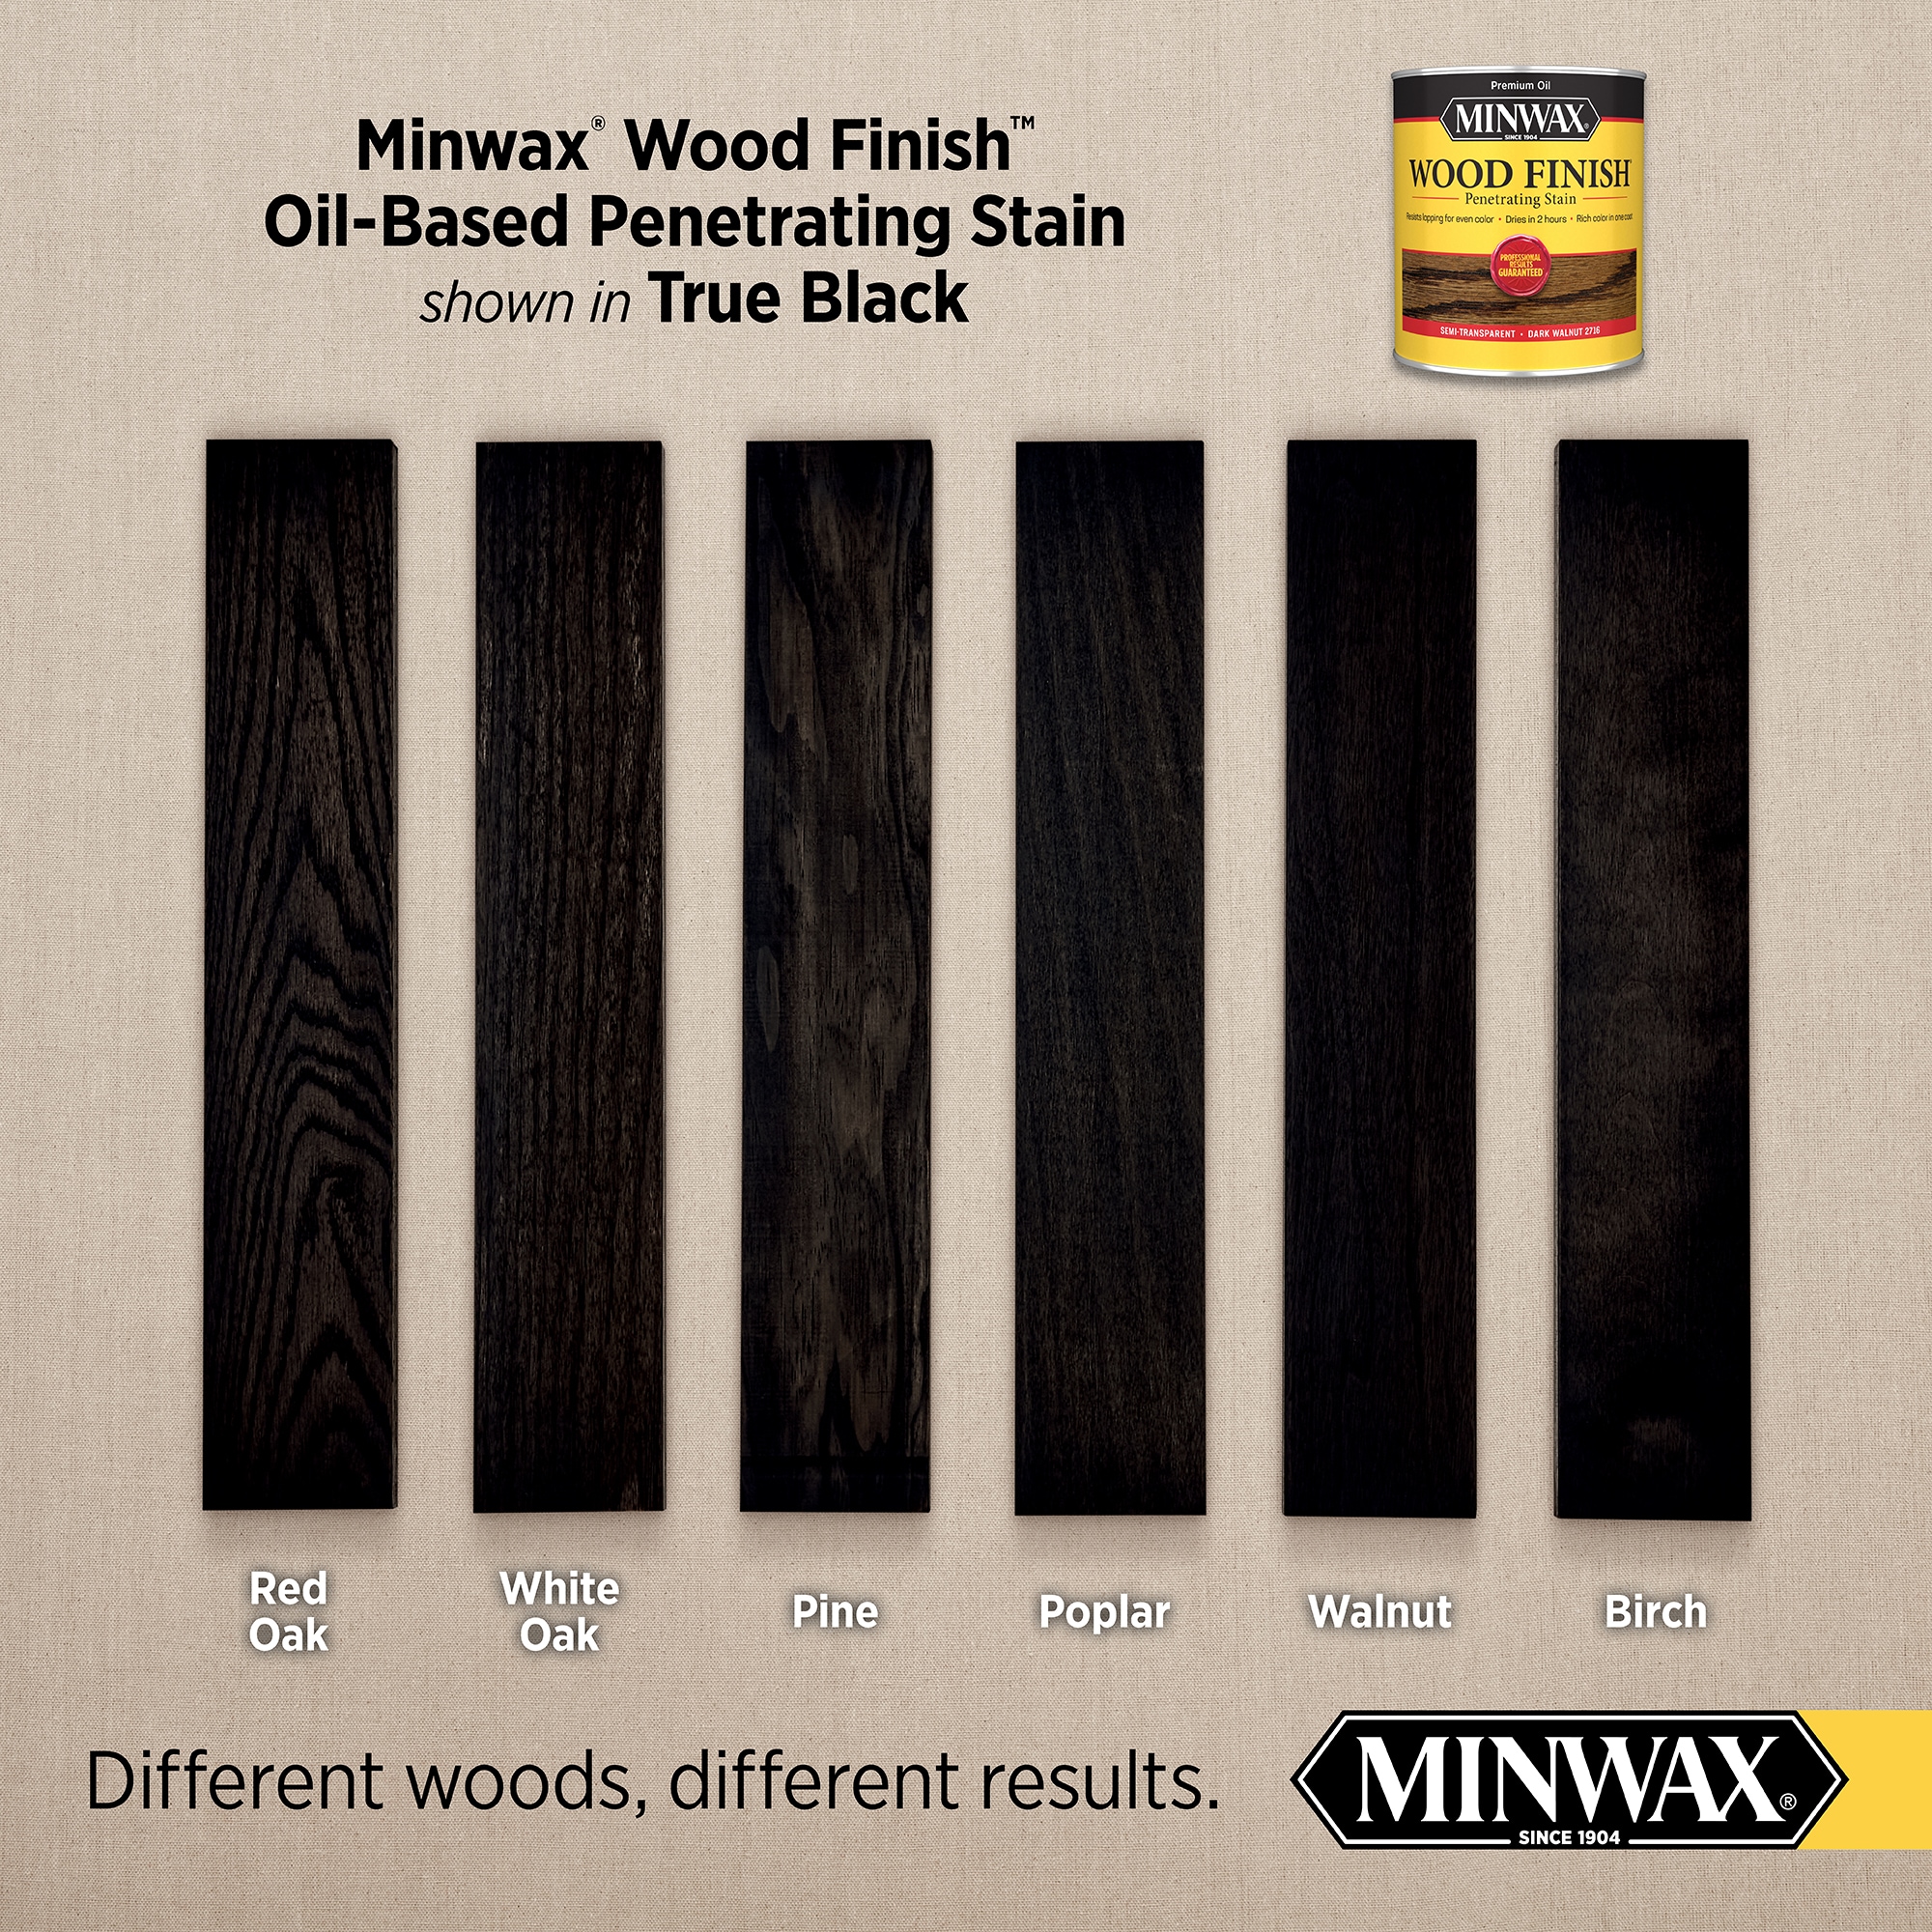 The 3 best black wood stain colors!